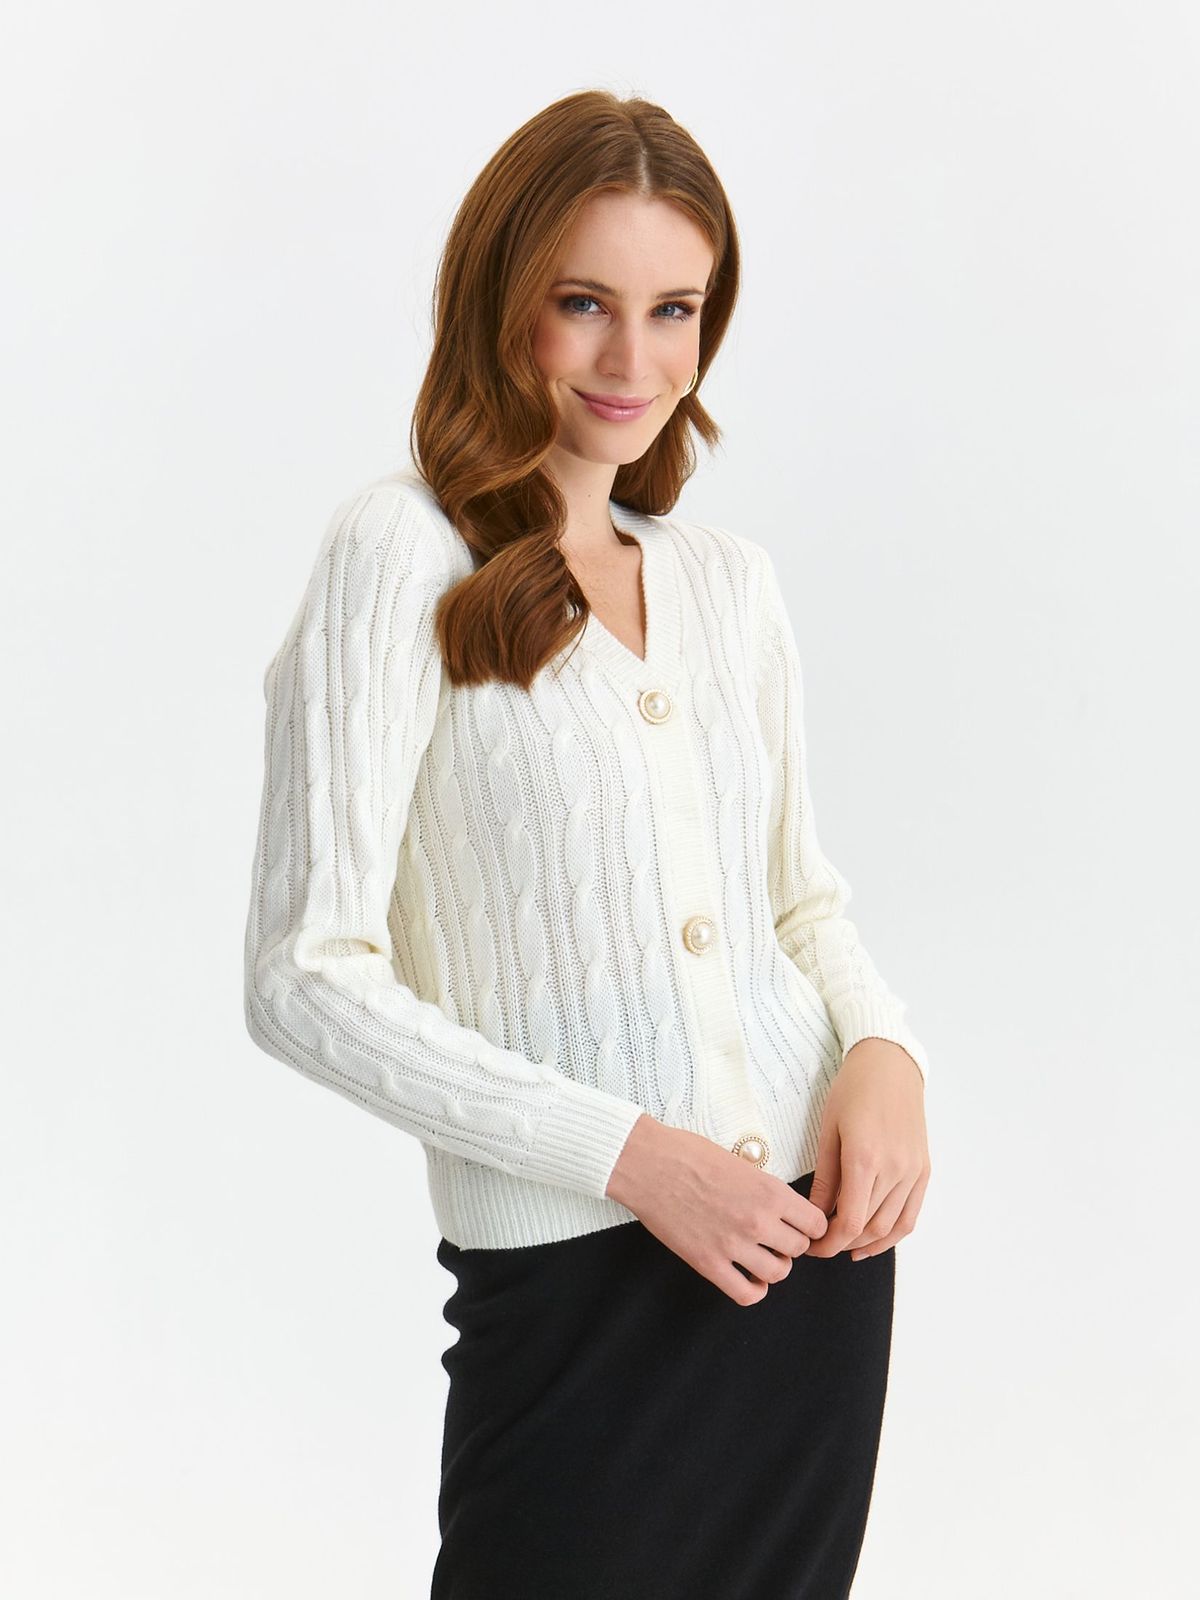 White cardigan knitted with v-neckline with decorative buttons